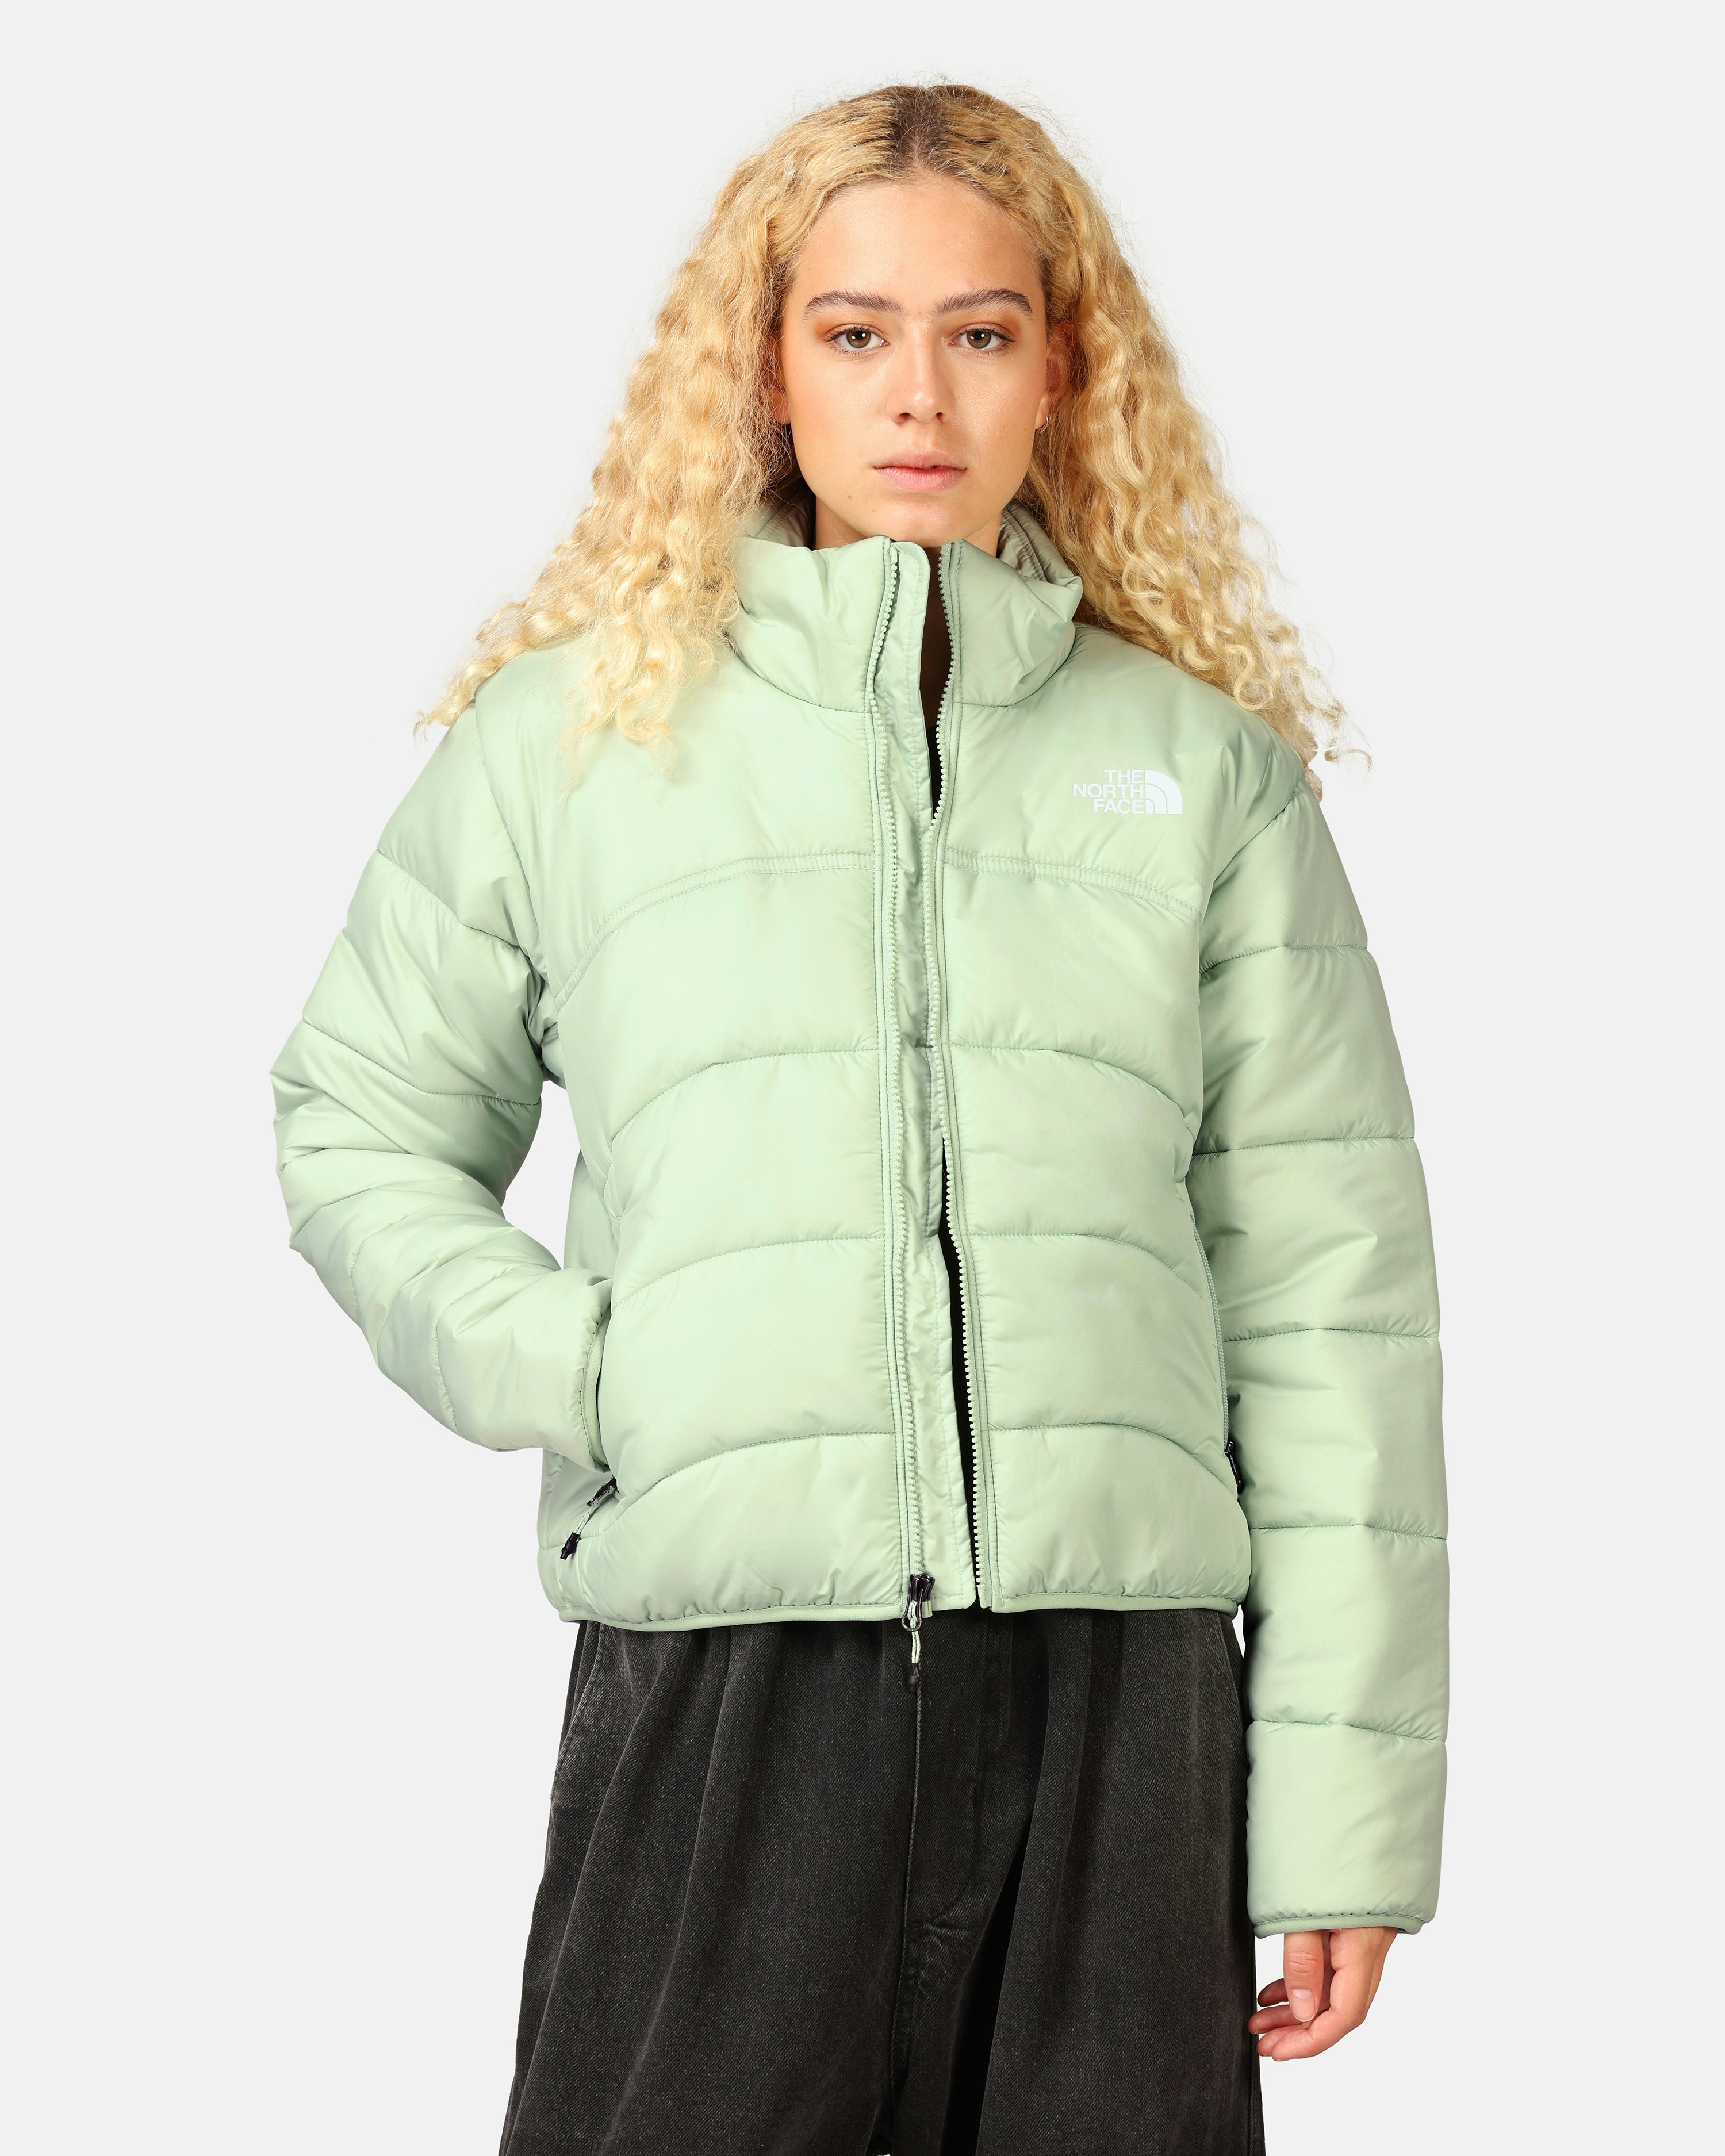 The North Face, Get the jackets at Junkyard